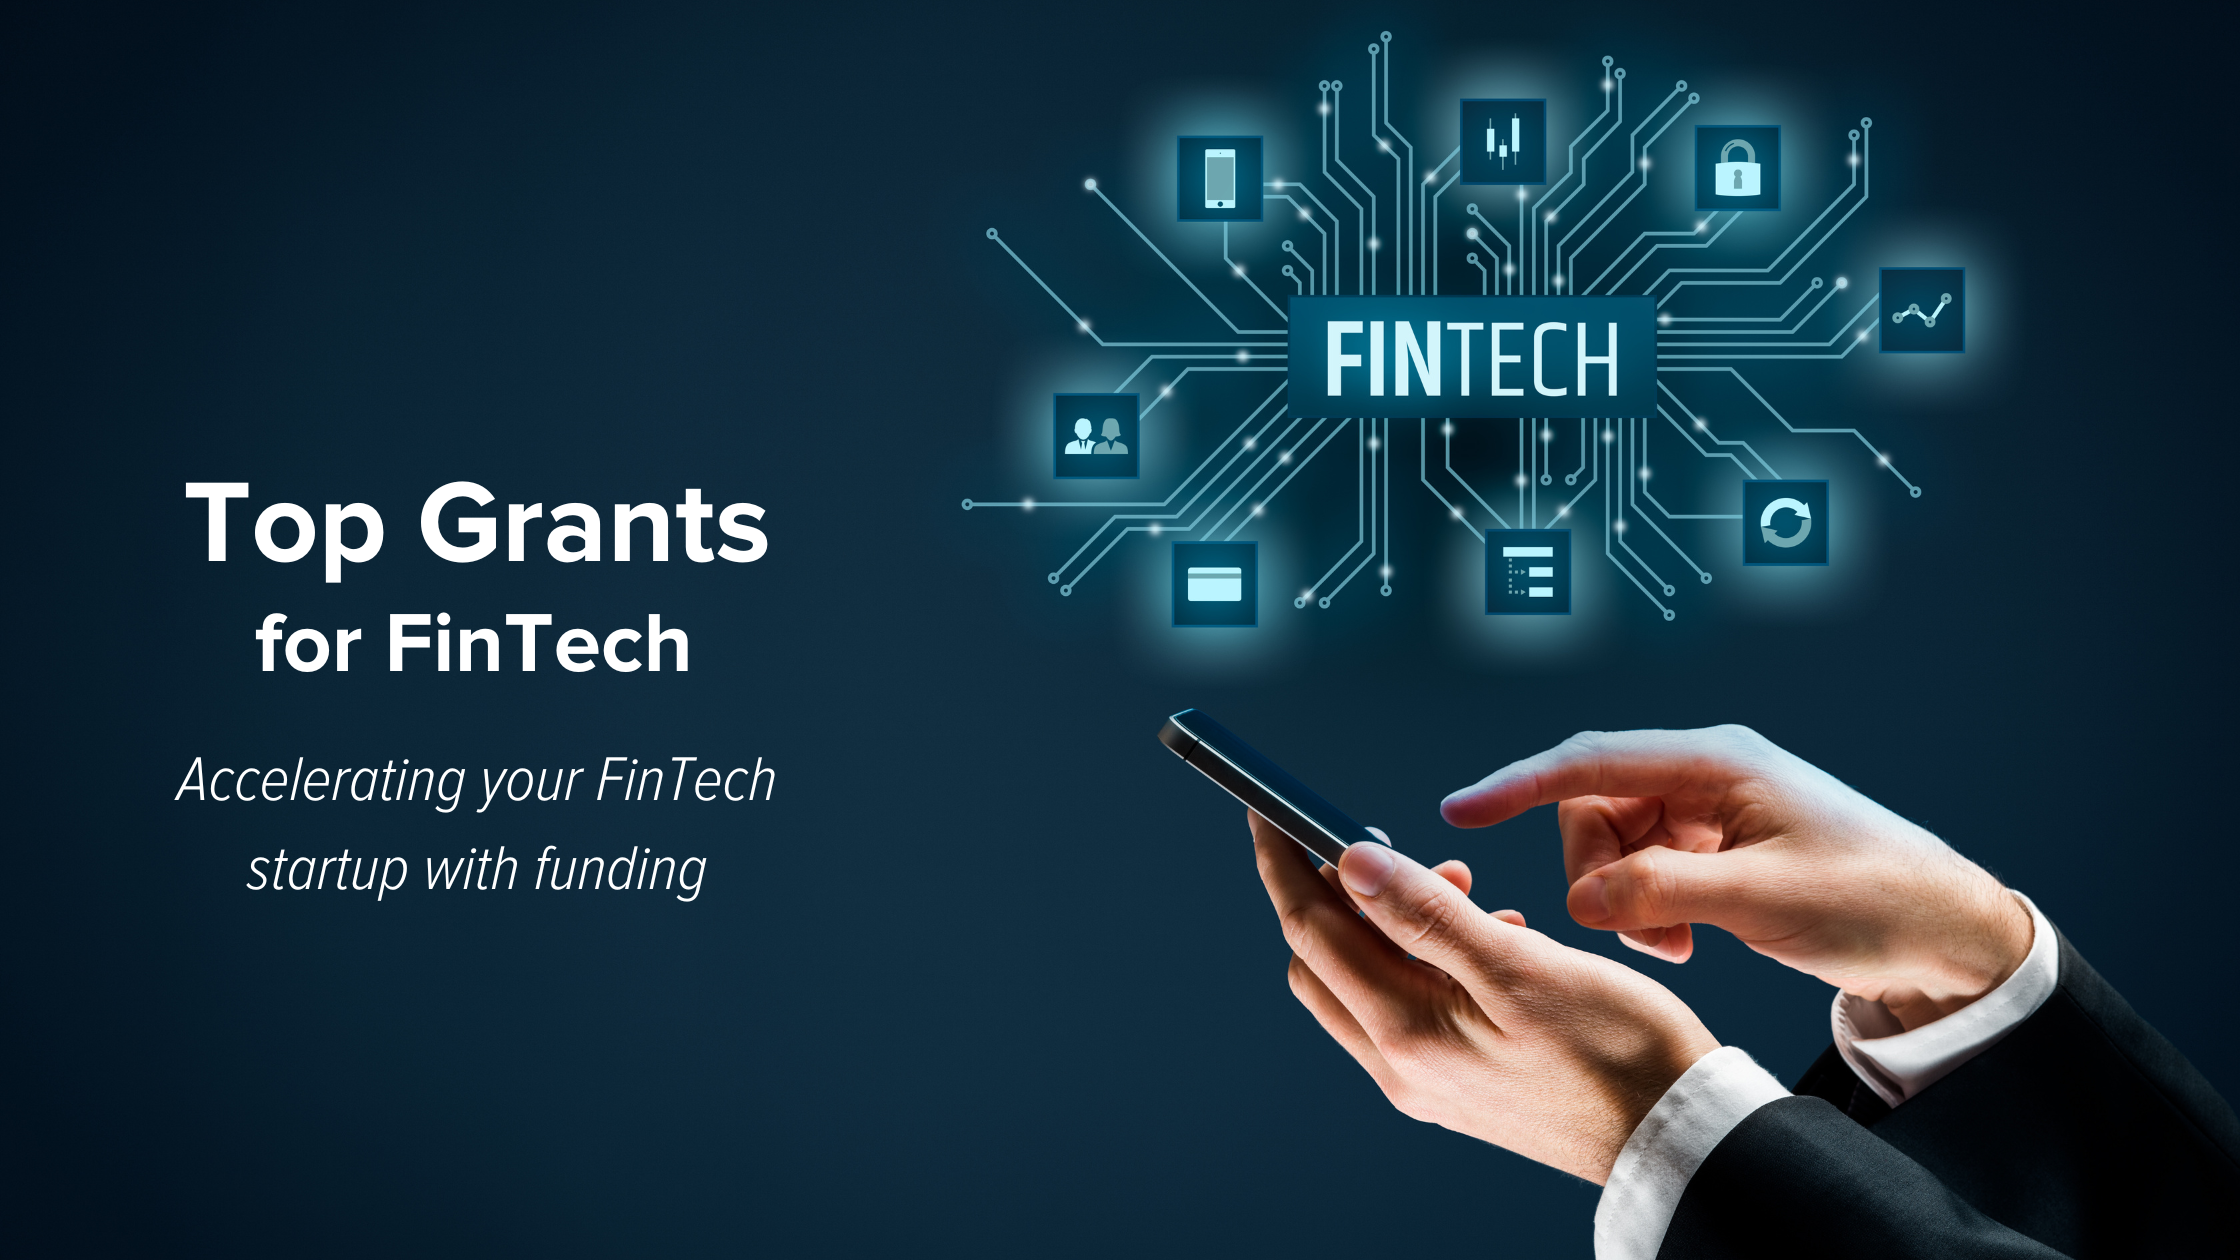 Top Grants for the FinTech Industry